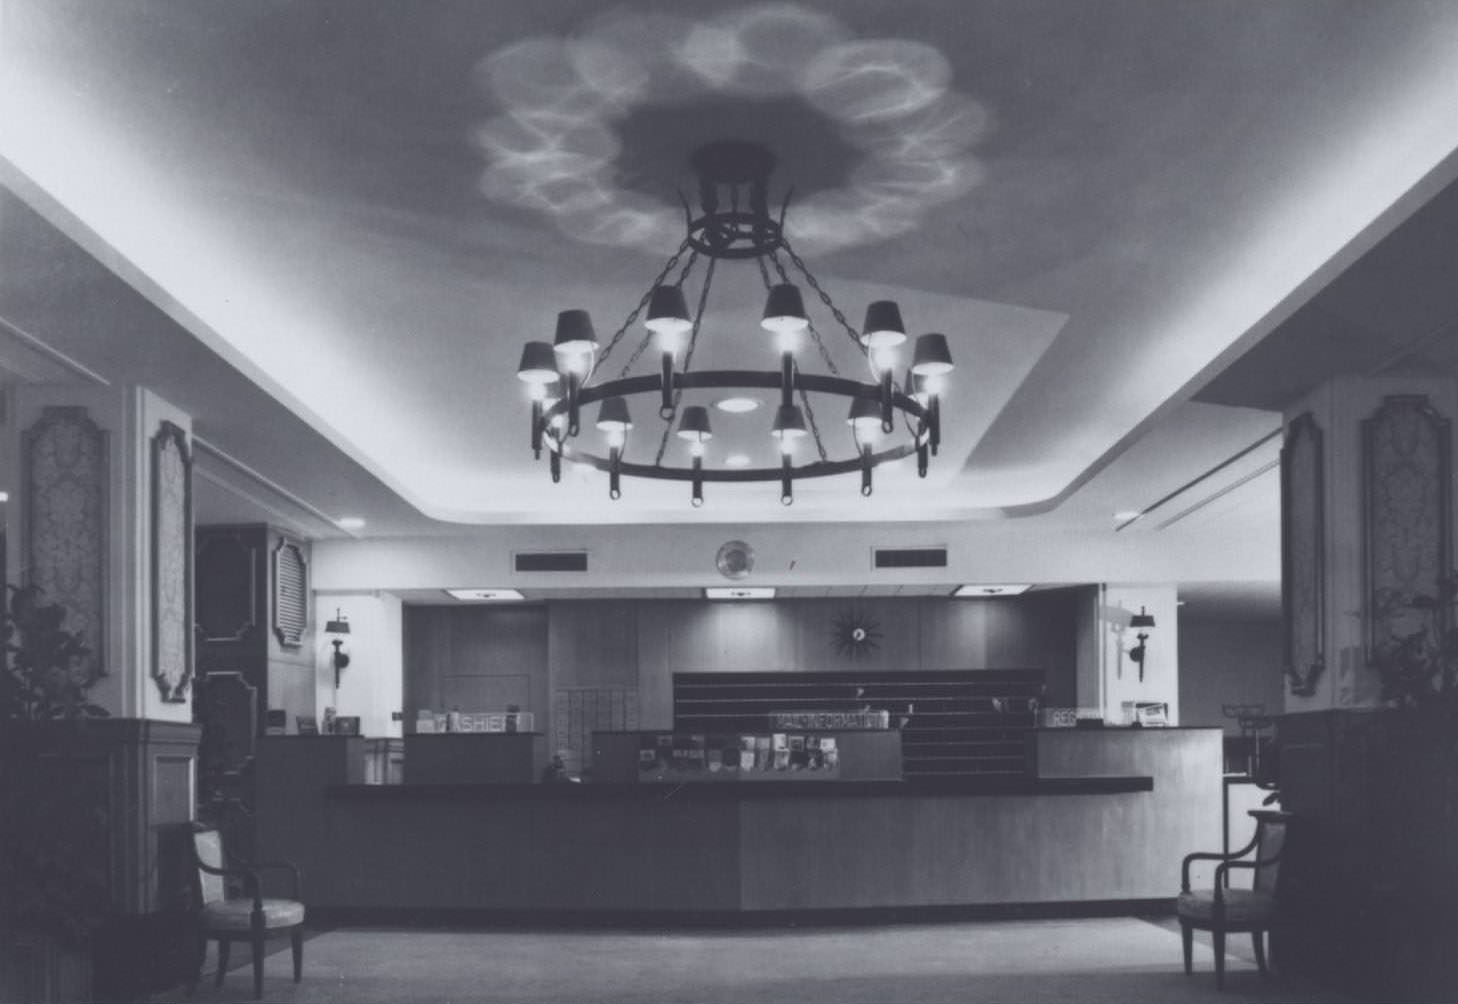 Lobby at the Stephen F. Austin Hotel, located at 701 Congress Avenue in Austin, 1960